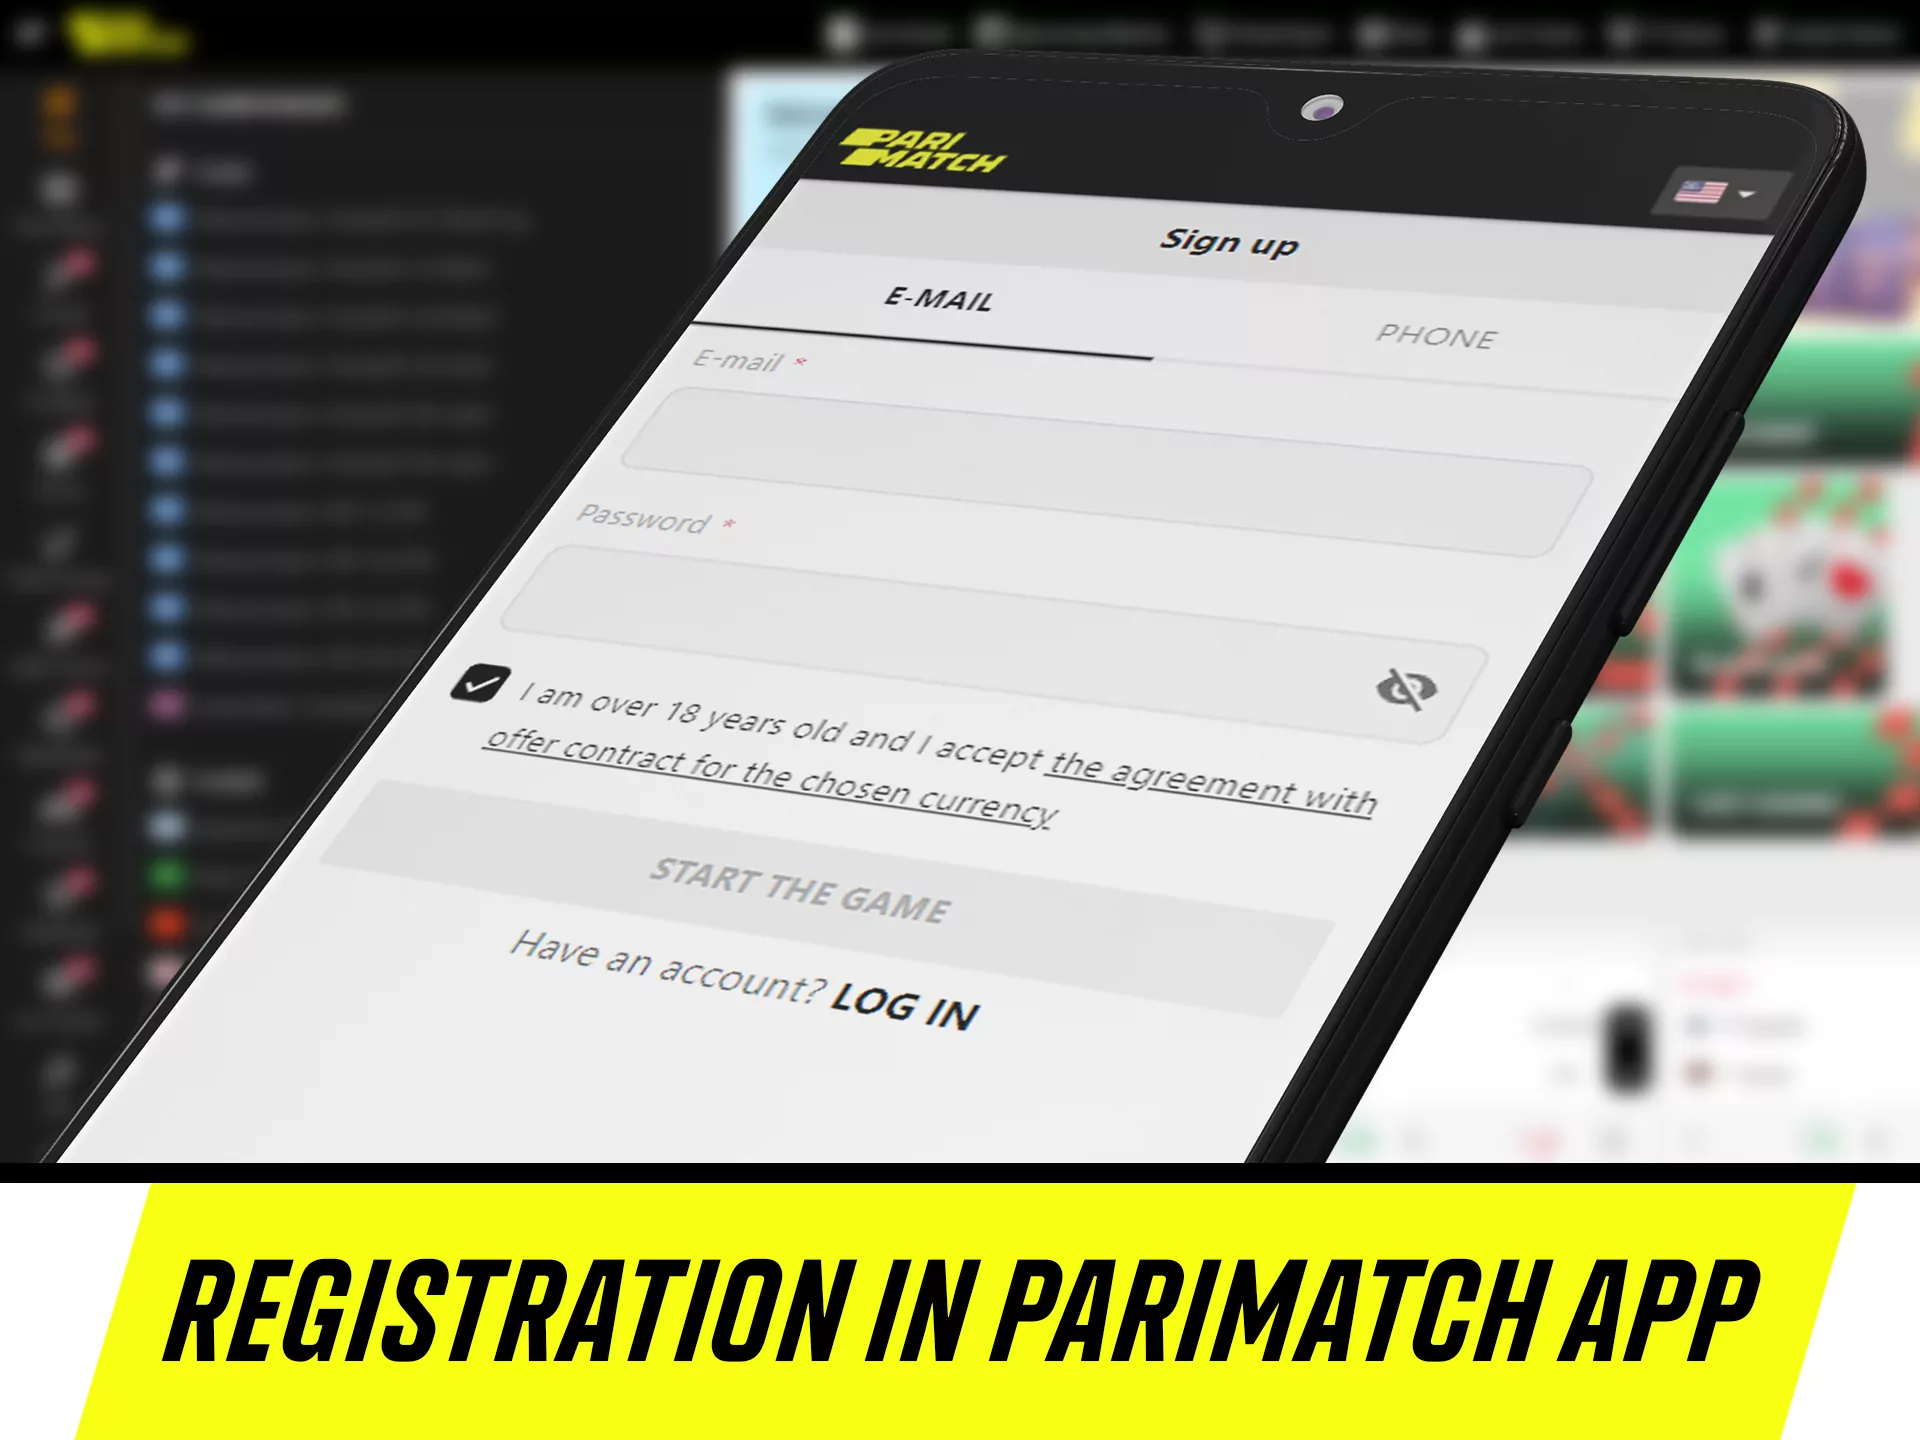 You can registrate in the Parimatch app.